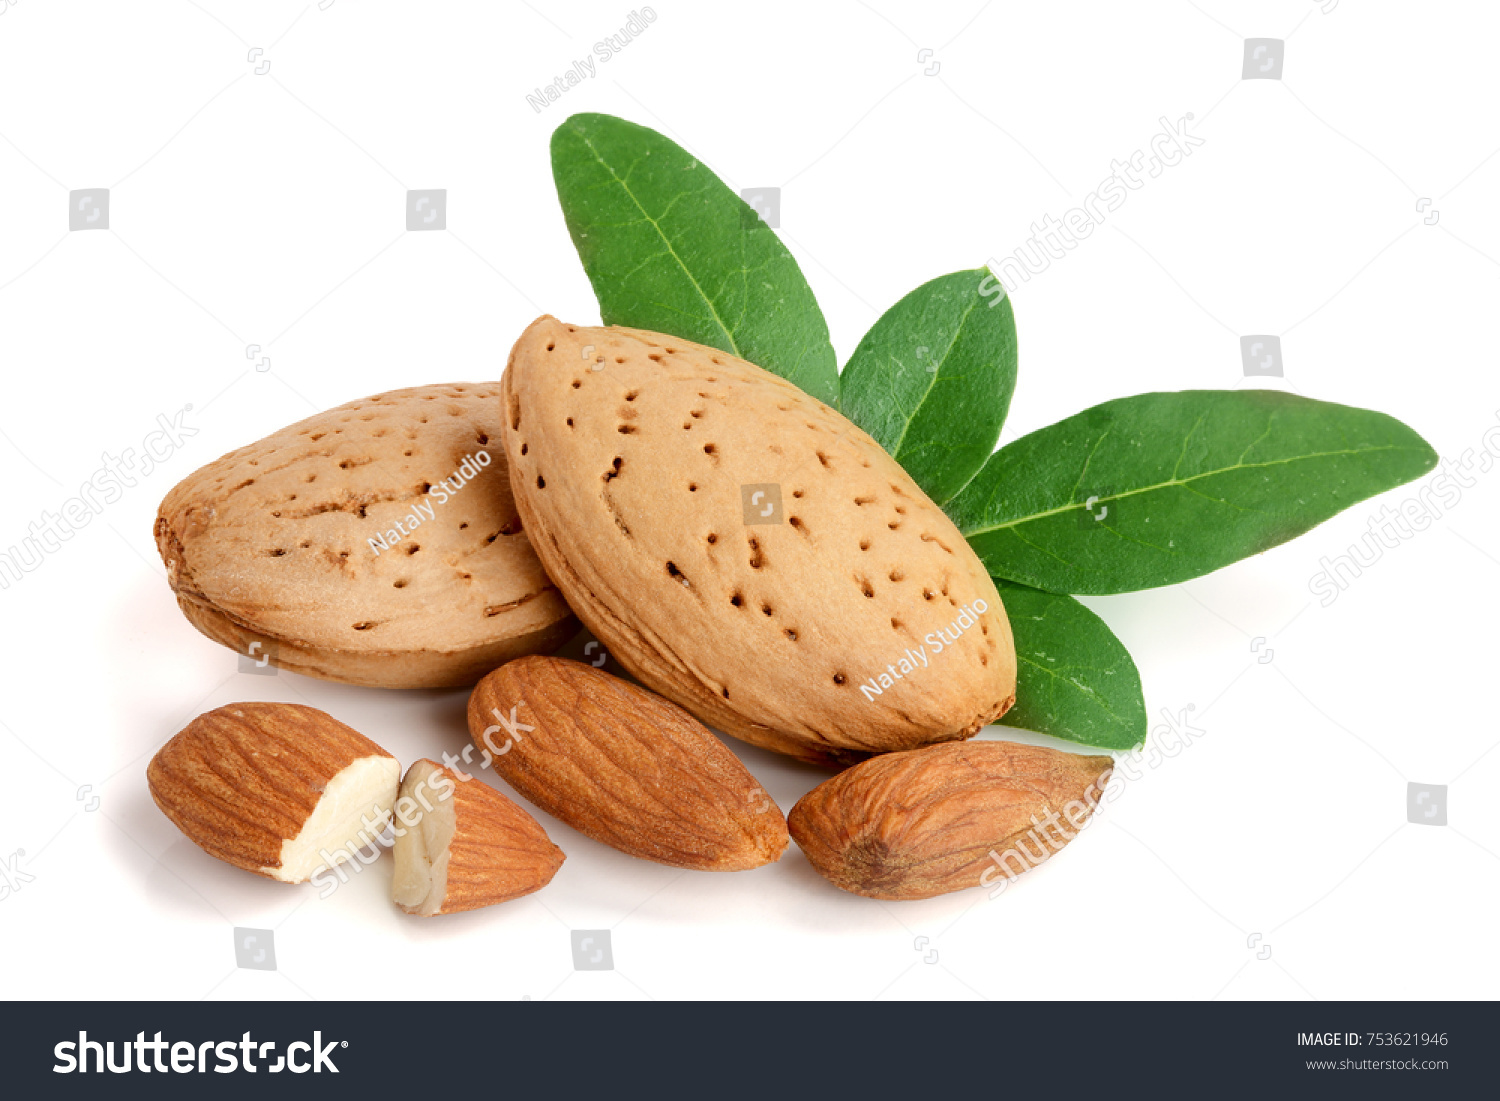 Group of almond nuts with leaves isolated on a white background. #753621946